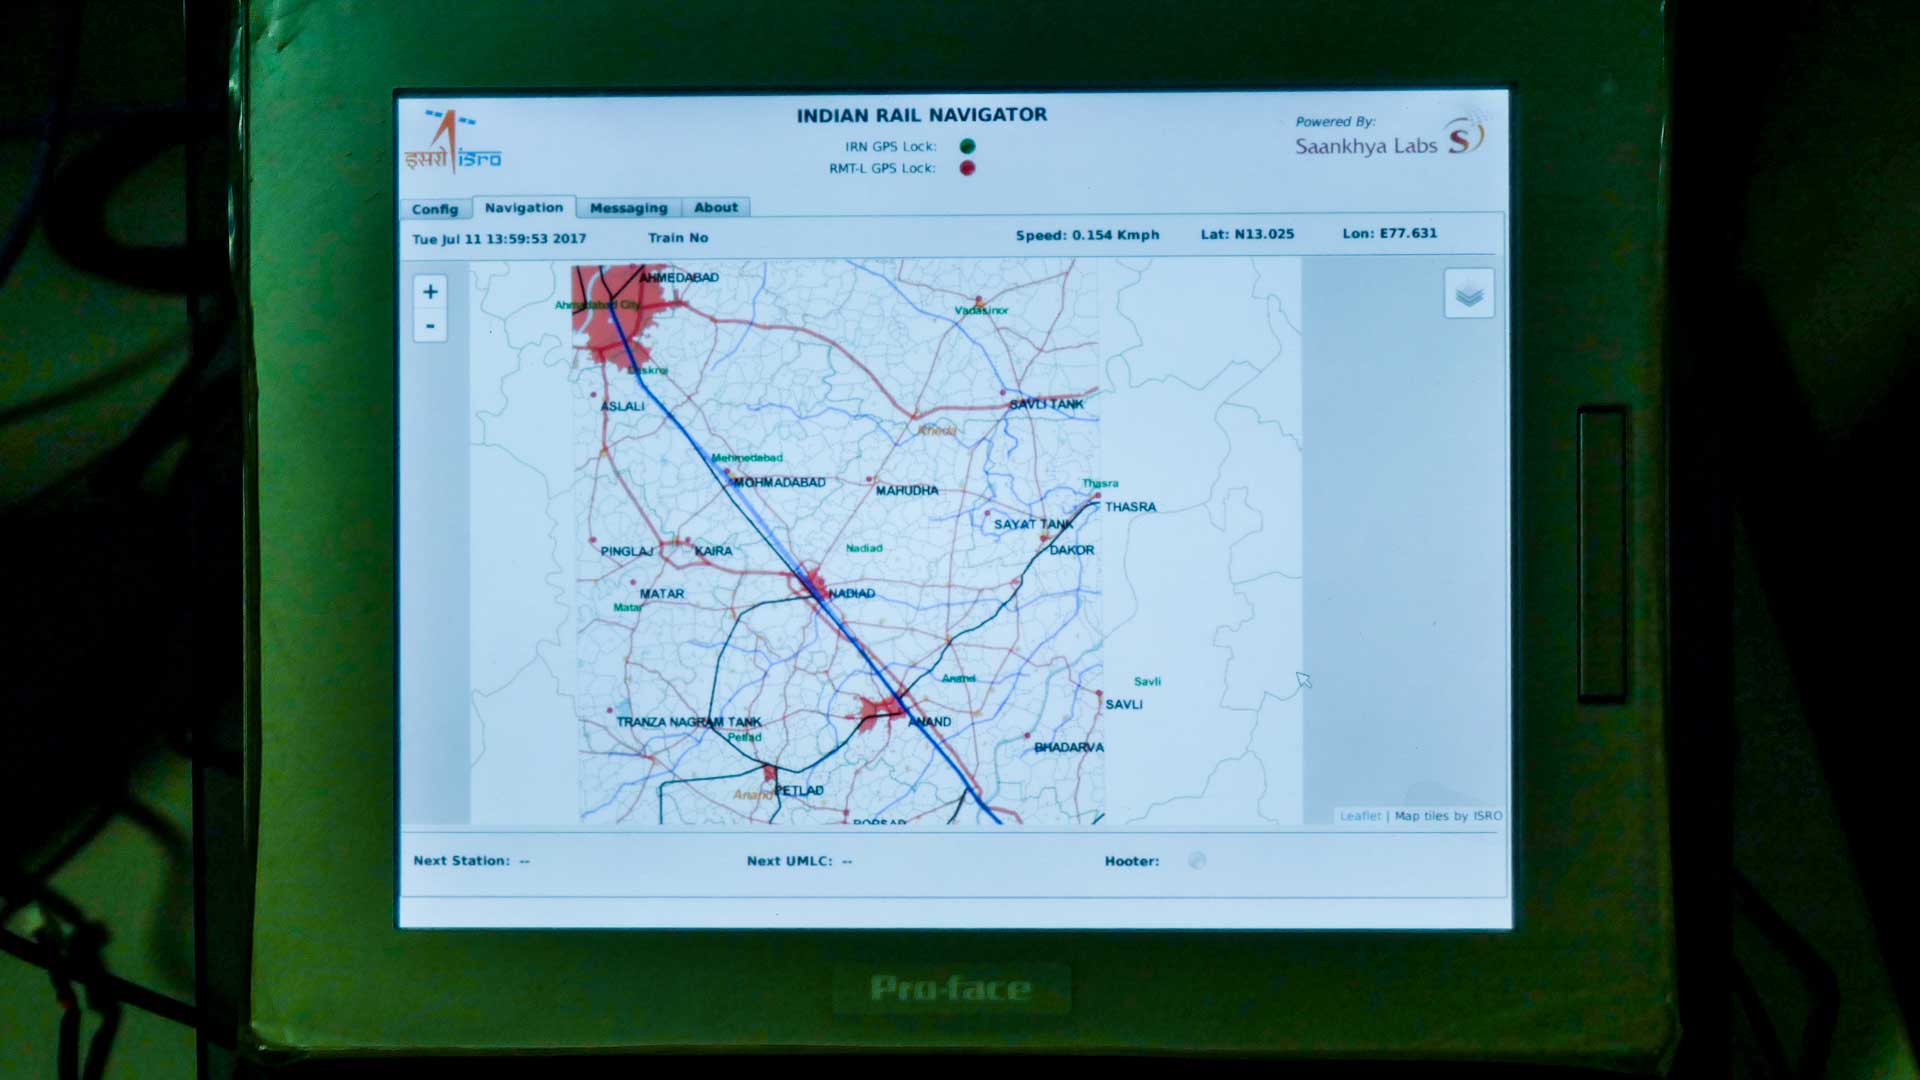 The system allows two-way communication between running trains and personnel at stations and control centres